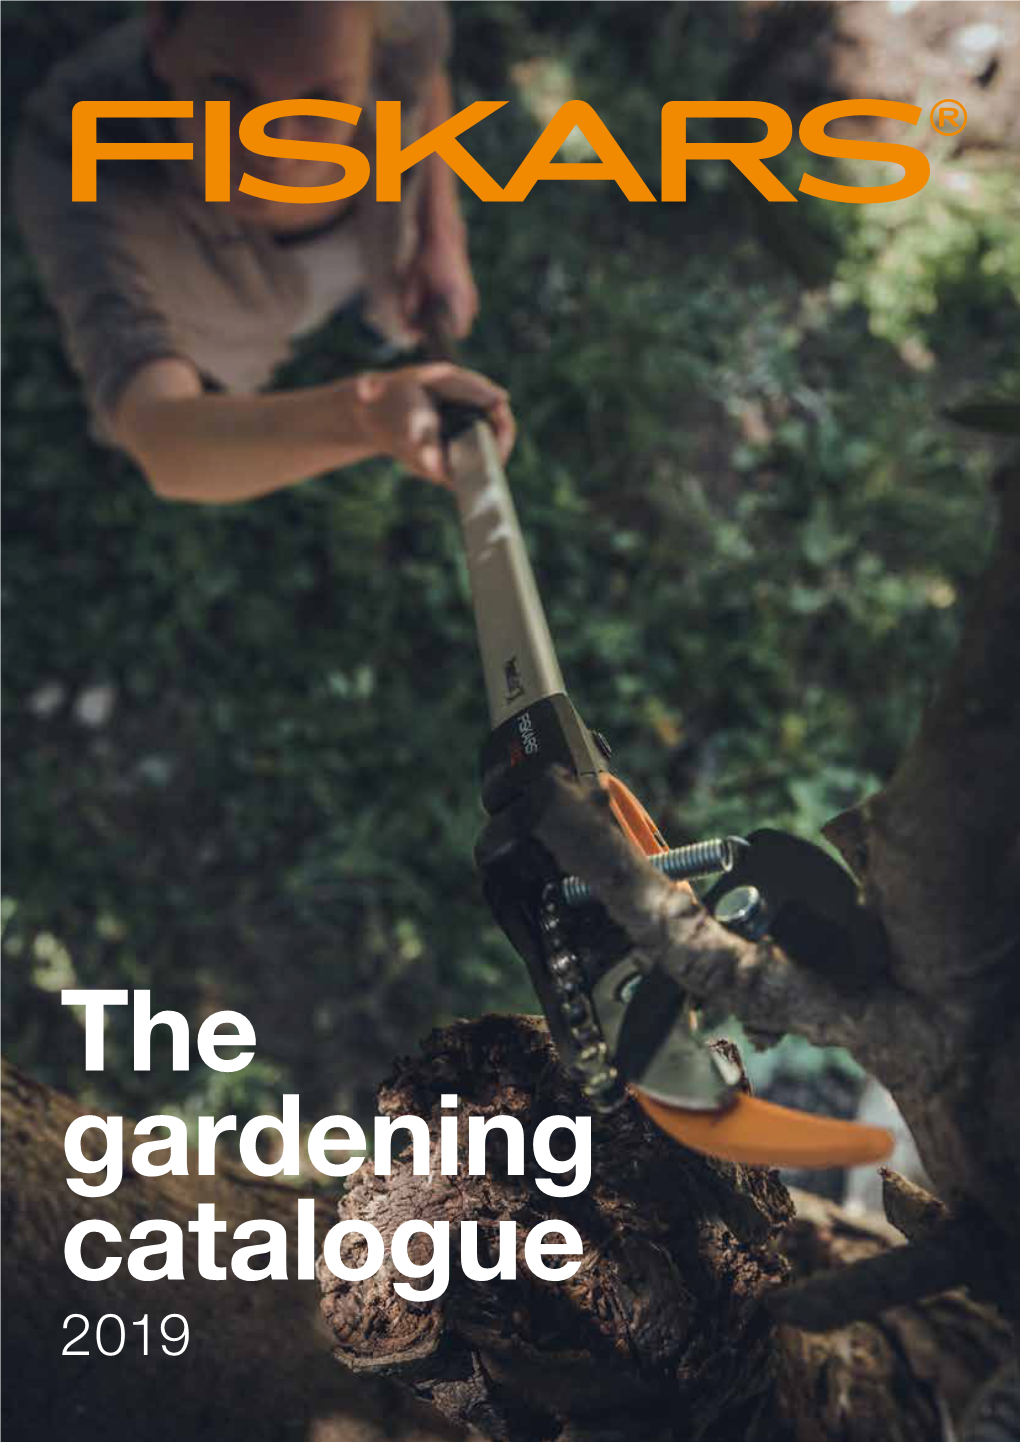 The Gardening Catalogue 2019 Over 365 Years of History Are Proof of Our Commitment to Quality